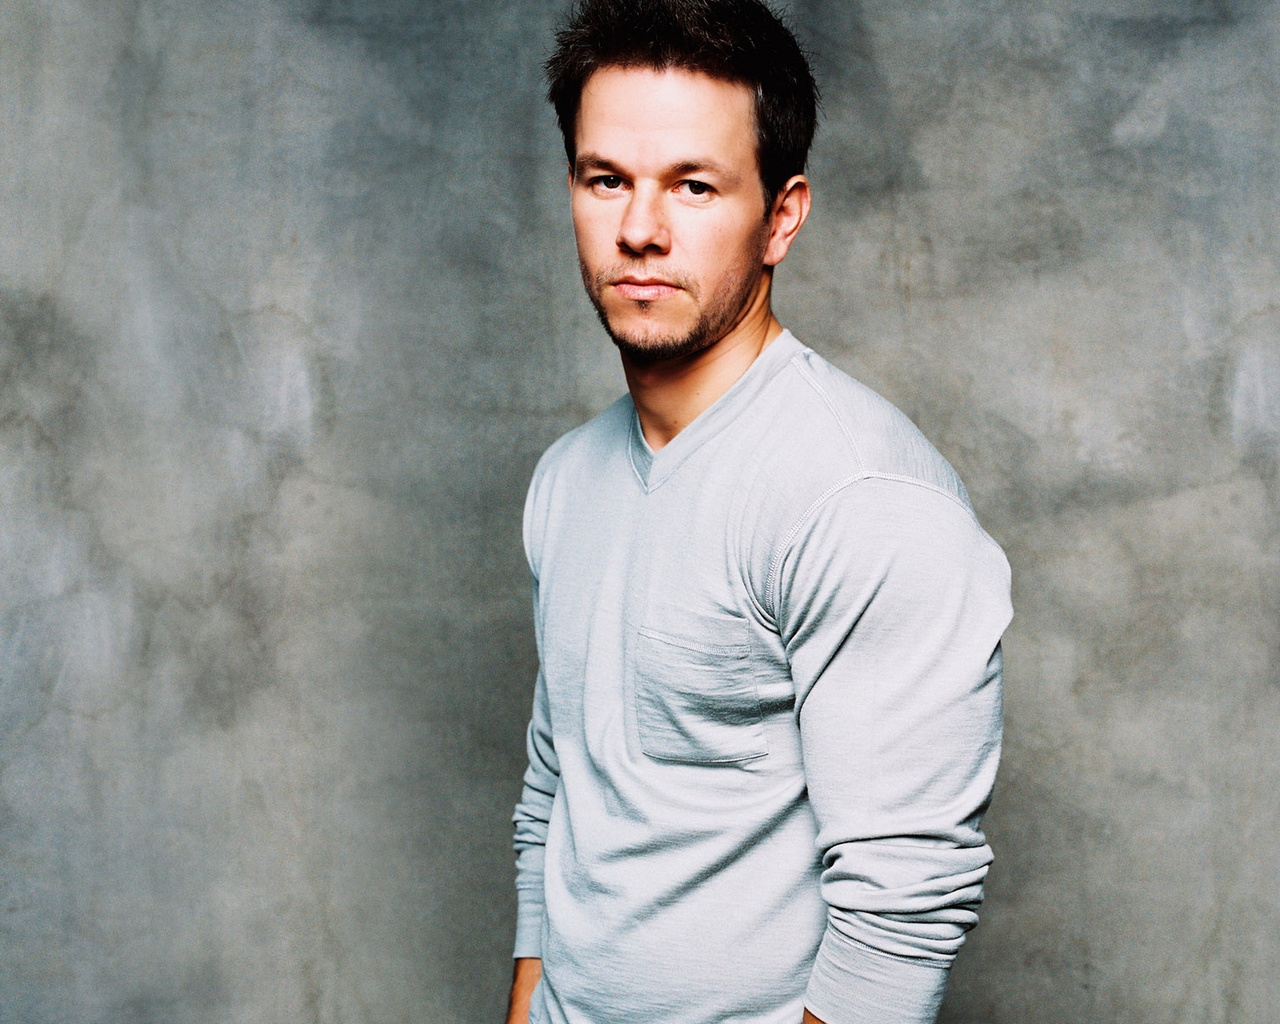 Mark Wahlberg for 1280 x 1024 resolution